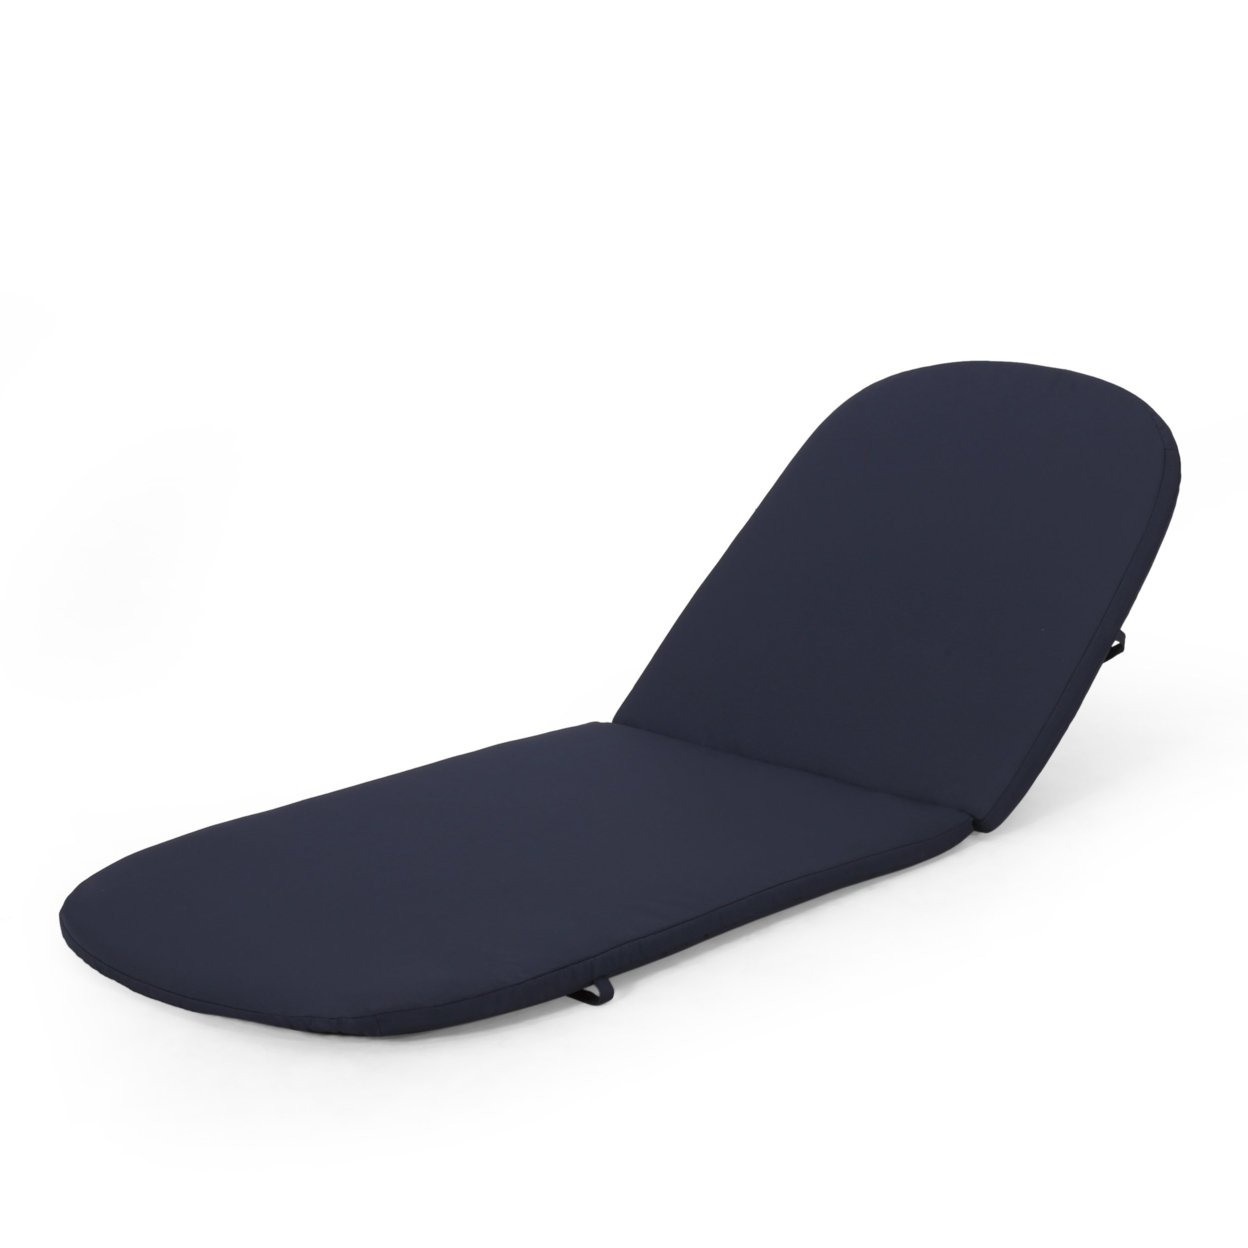 Farirra Outdoor Water Resistant Chaise Lounge Cushions (Set Of 2) - Navy Blue